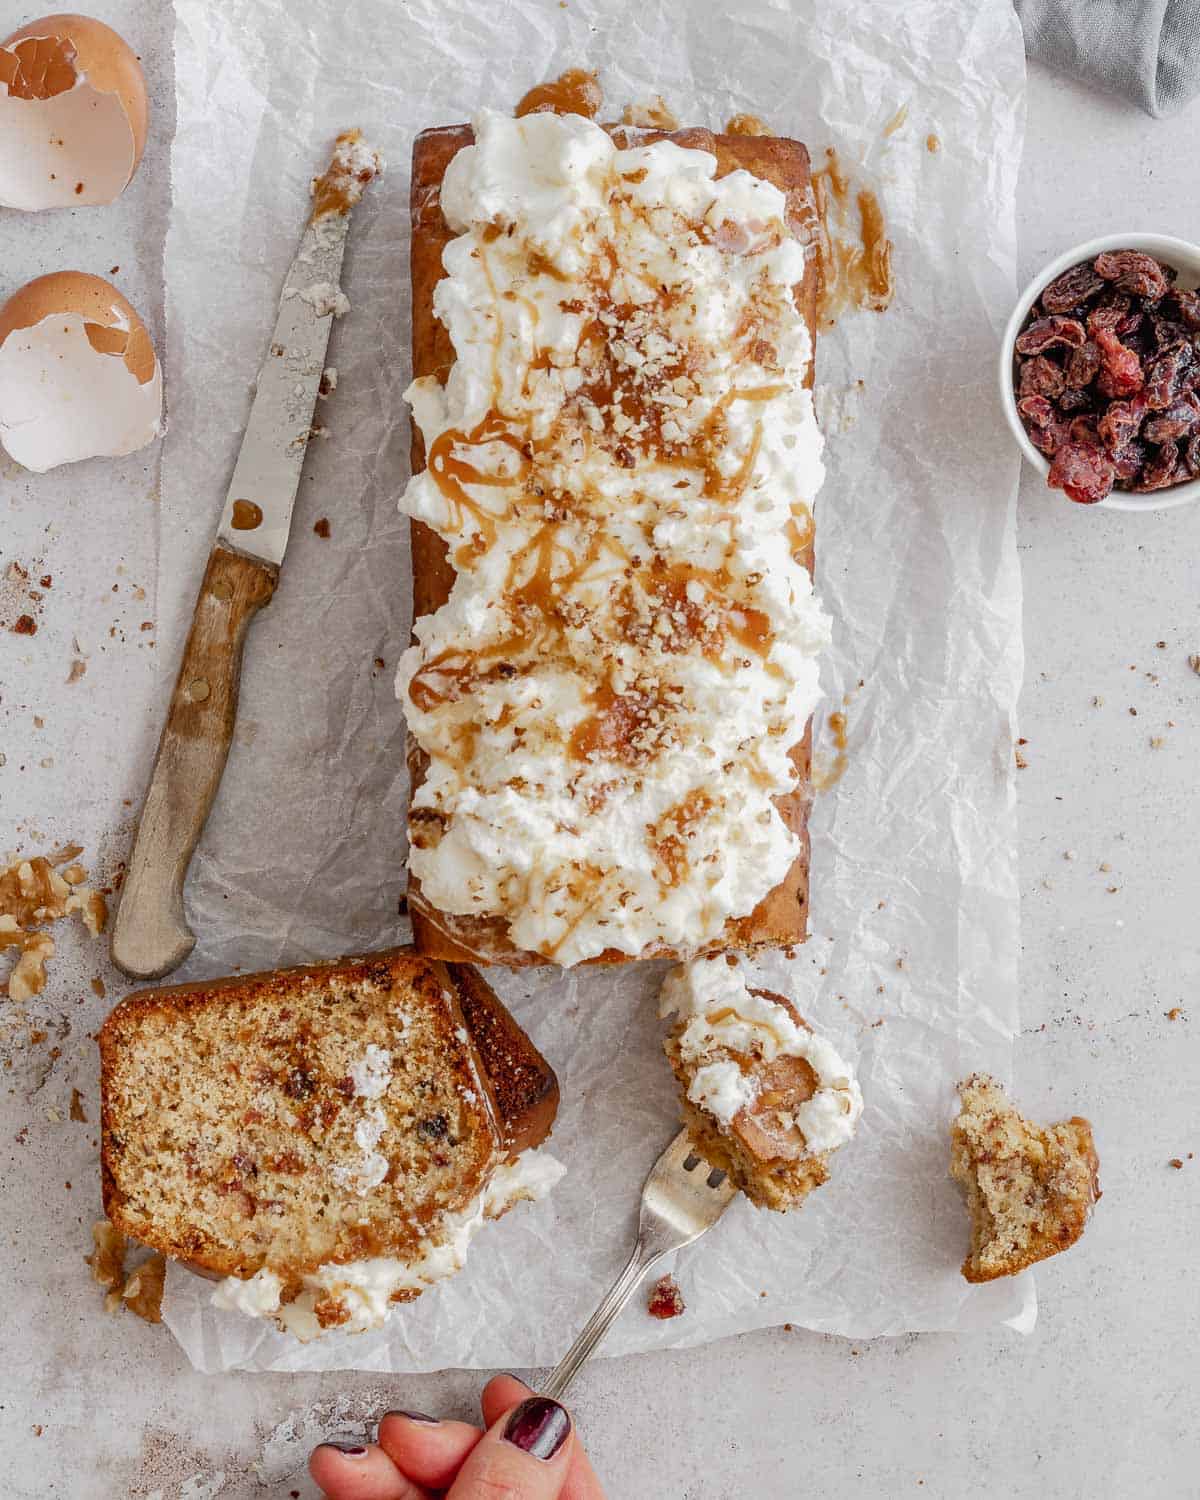 A-Dried Fruits Loaf with Walnuts and Almonds-on-the-light-white-table-with-parchment-paper-the-loaf-has-fresh-whipped-cream-and-caramel-on-top- it-is-sliced-showing-the-dired-fruits-inside-An-hand-keep-a-fork-with-a-piece-of-cake-there-are-a-bowl-of-dried-fruits-and-a knife-aside